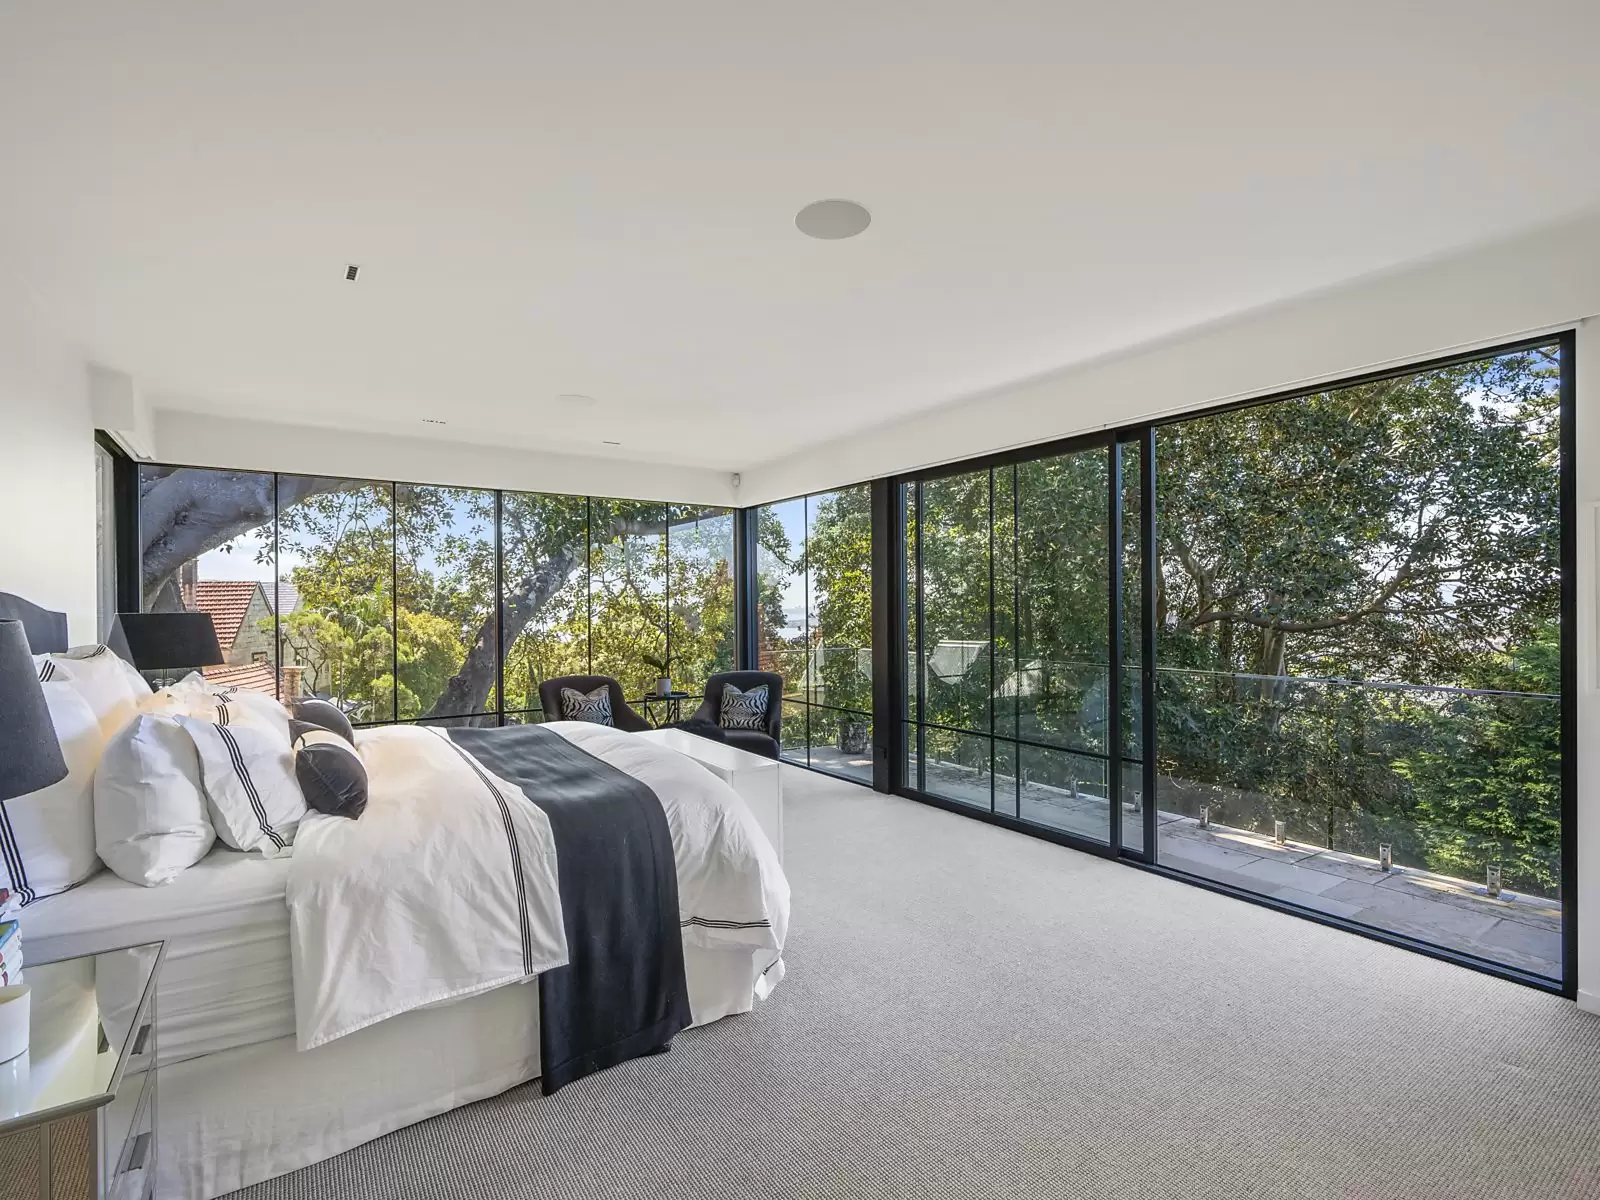 Photo #14: 15B Ginahgulla Road, Bellevue Hill - For Sale by Sydney Sotheby's International Realty